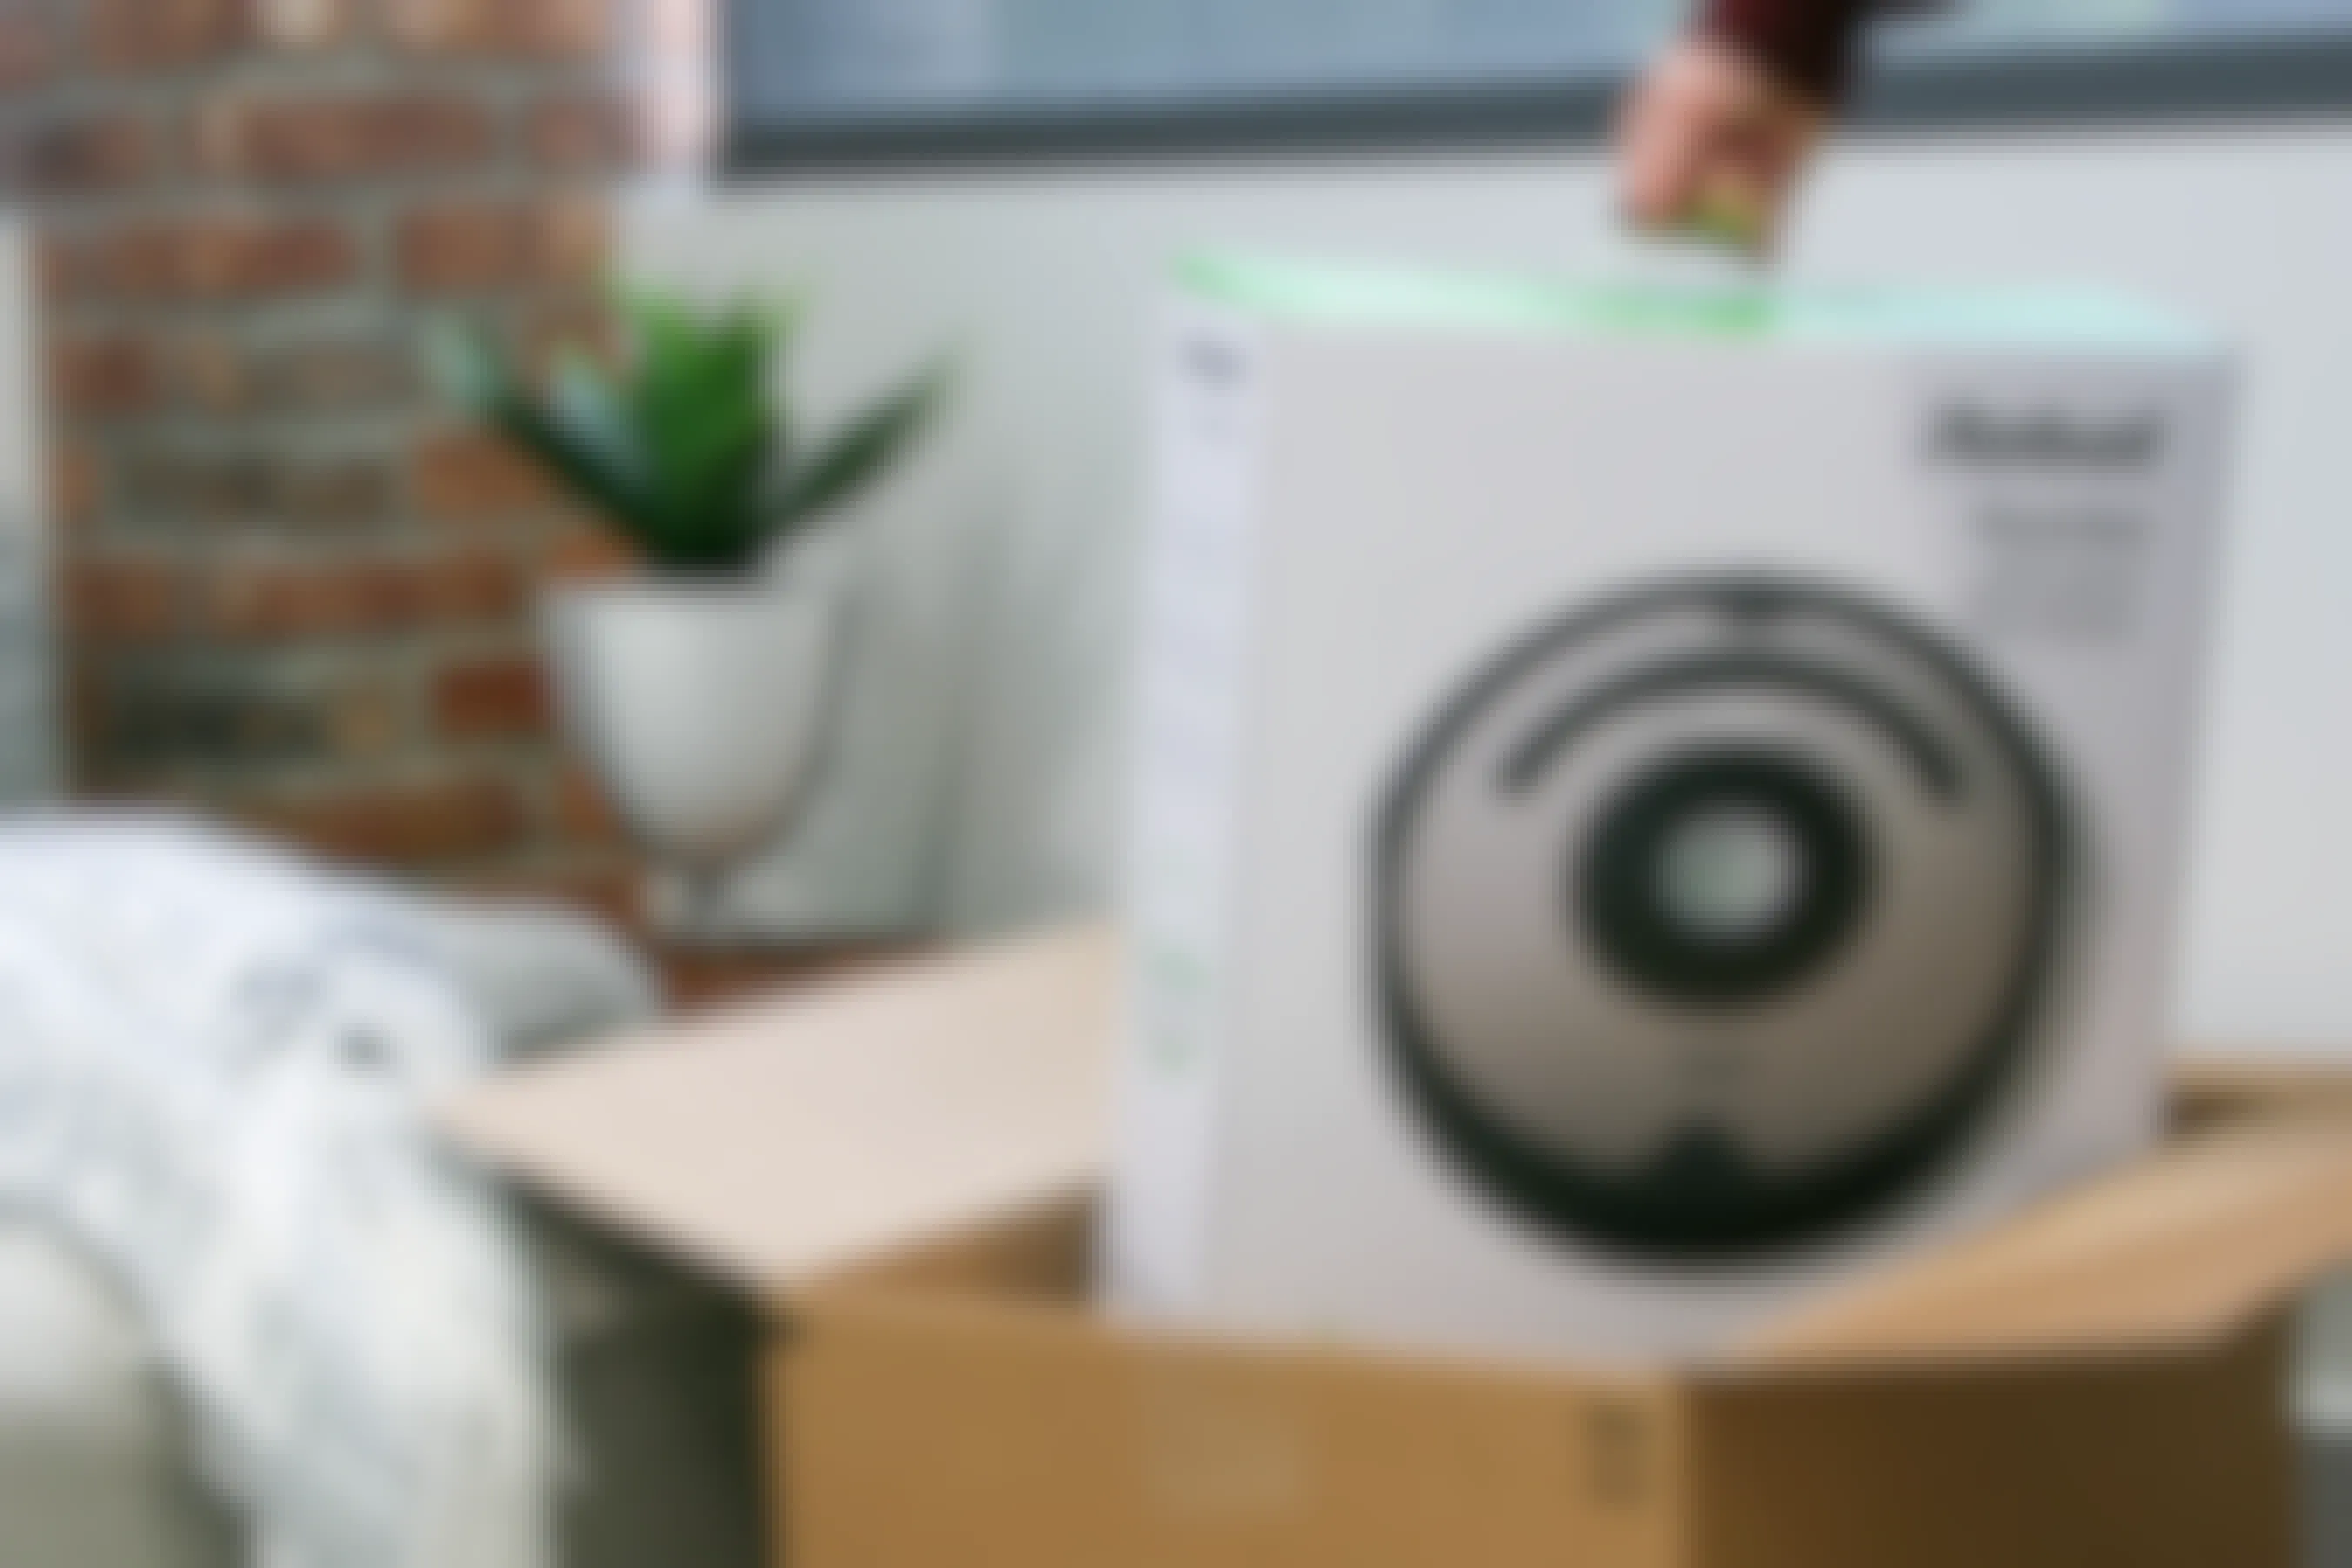 A person's hand lifting an iRobot Roomba out of a box.